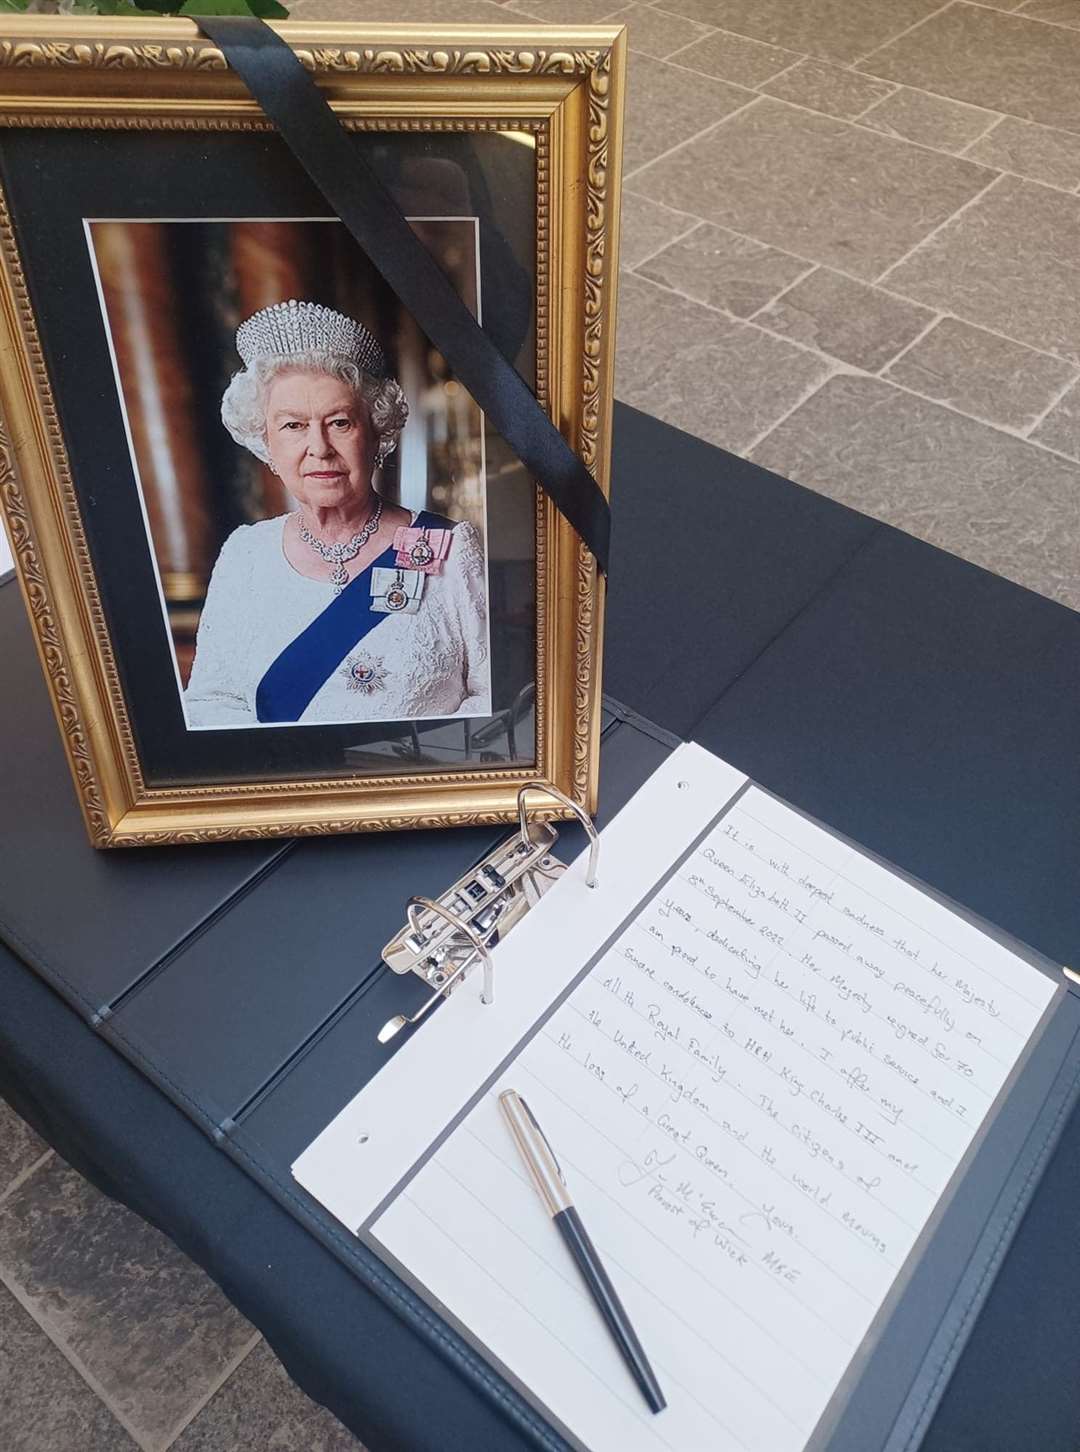 Provost McEwan's message in the book of condolence at Caithness House, alongside a portrait of the late Queen.